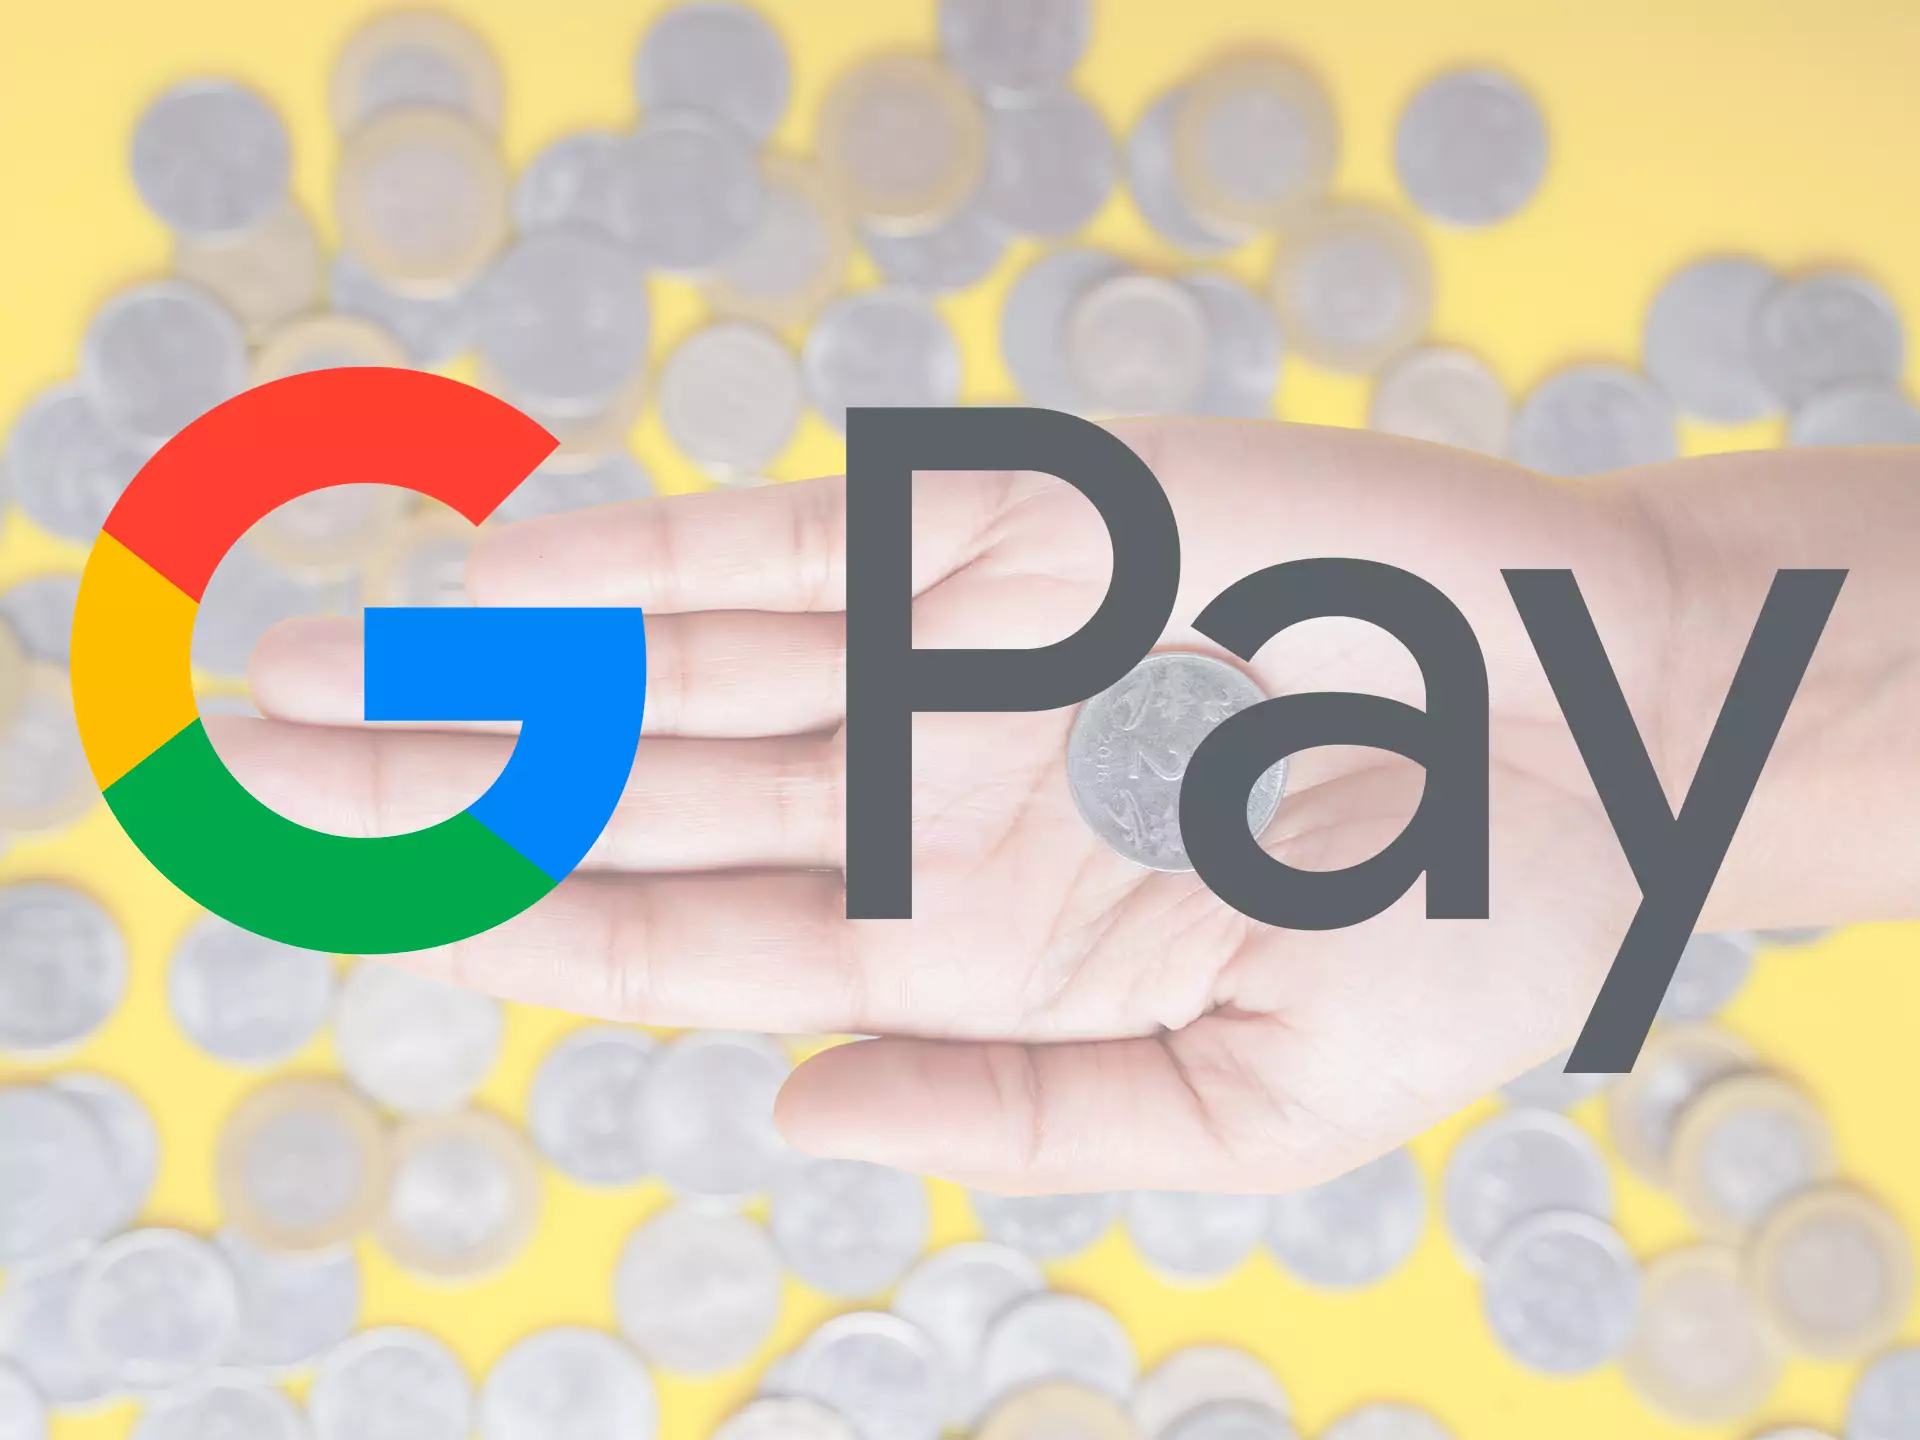 You can also use the payment system from Google.